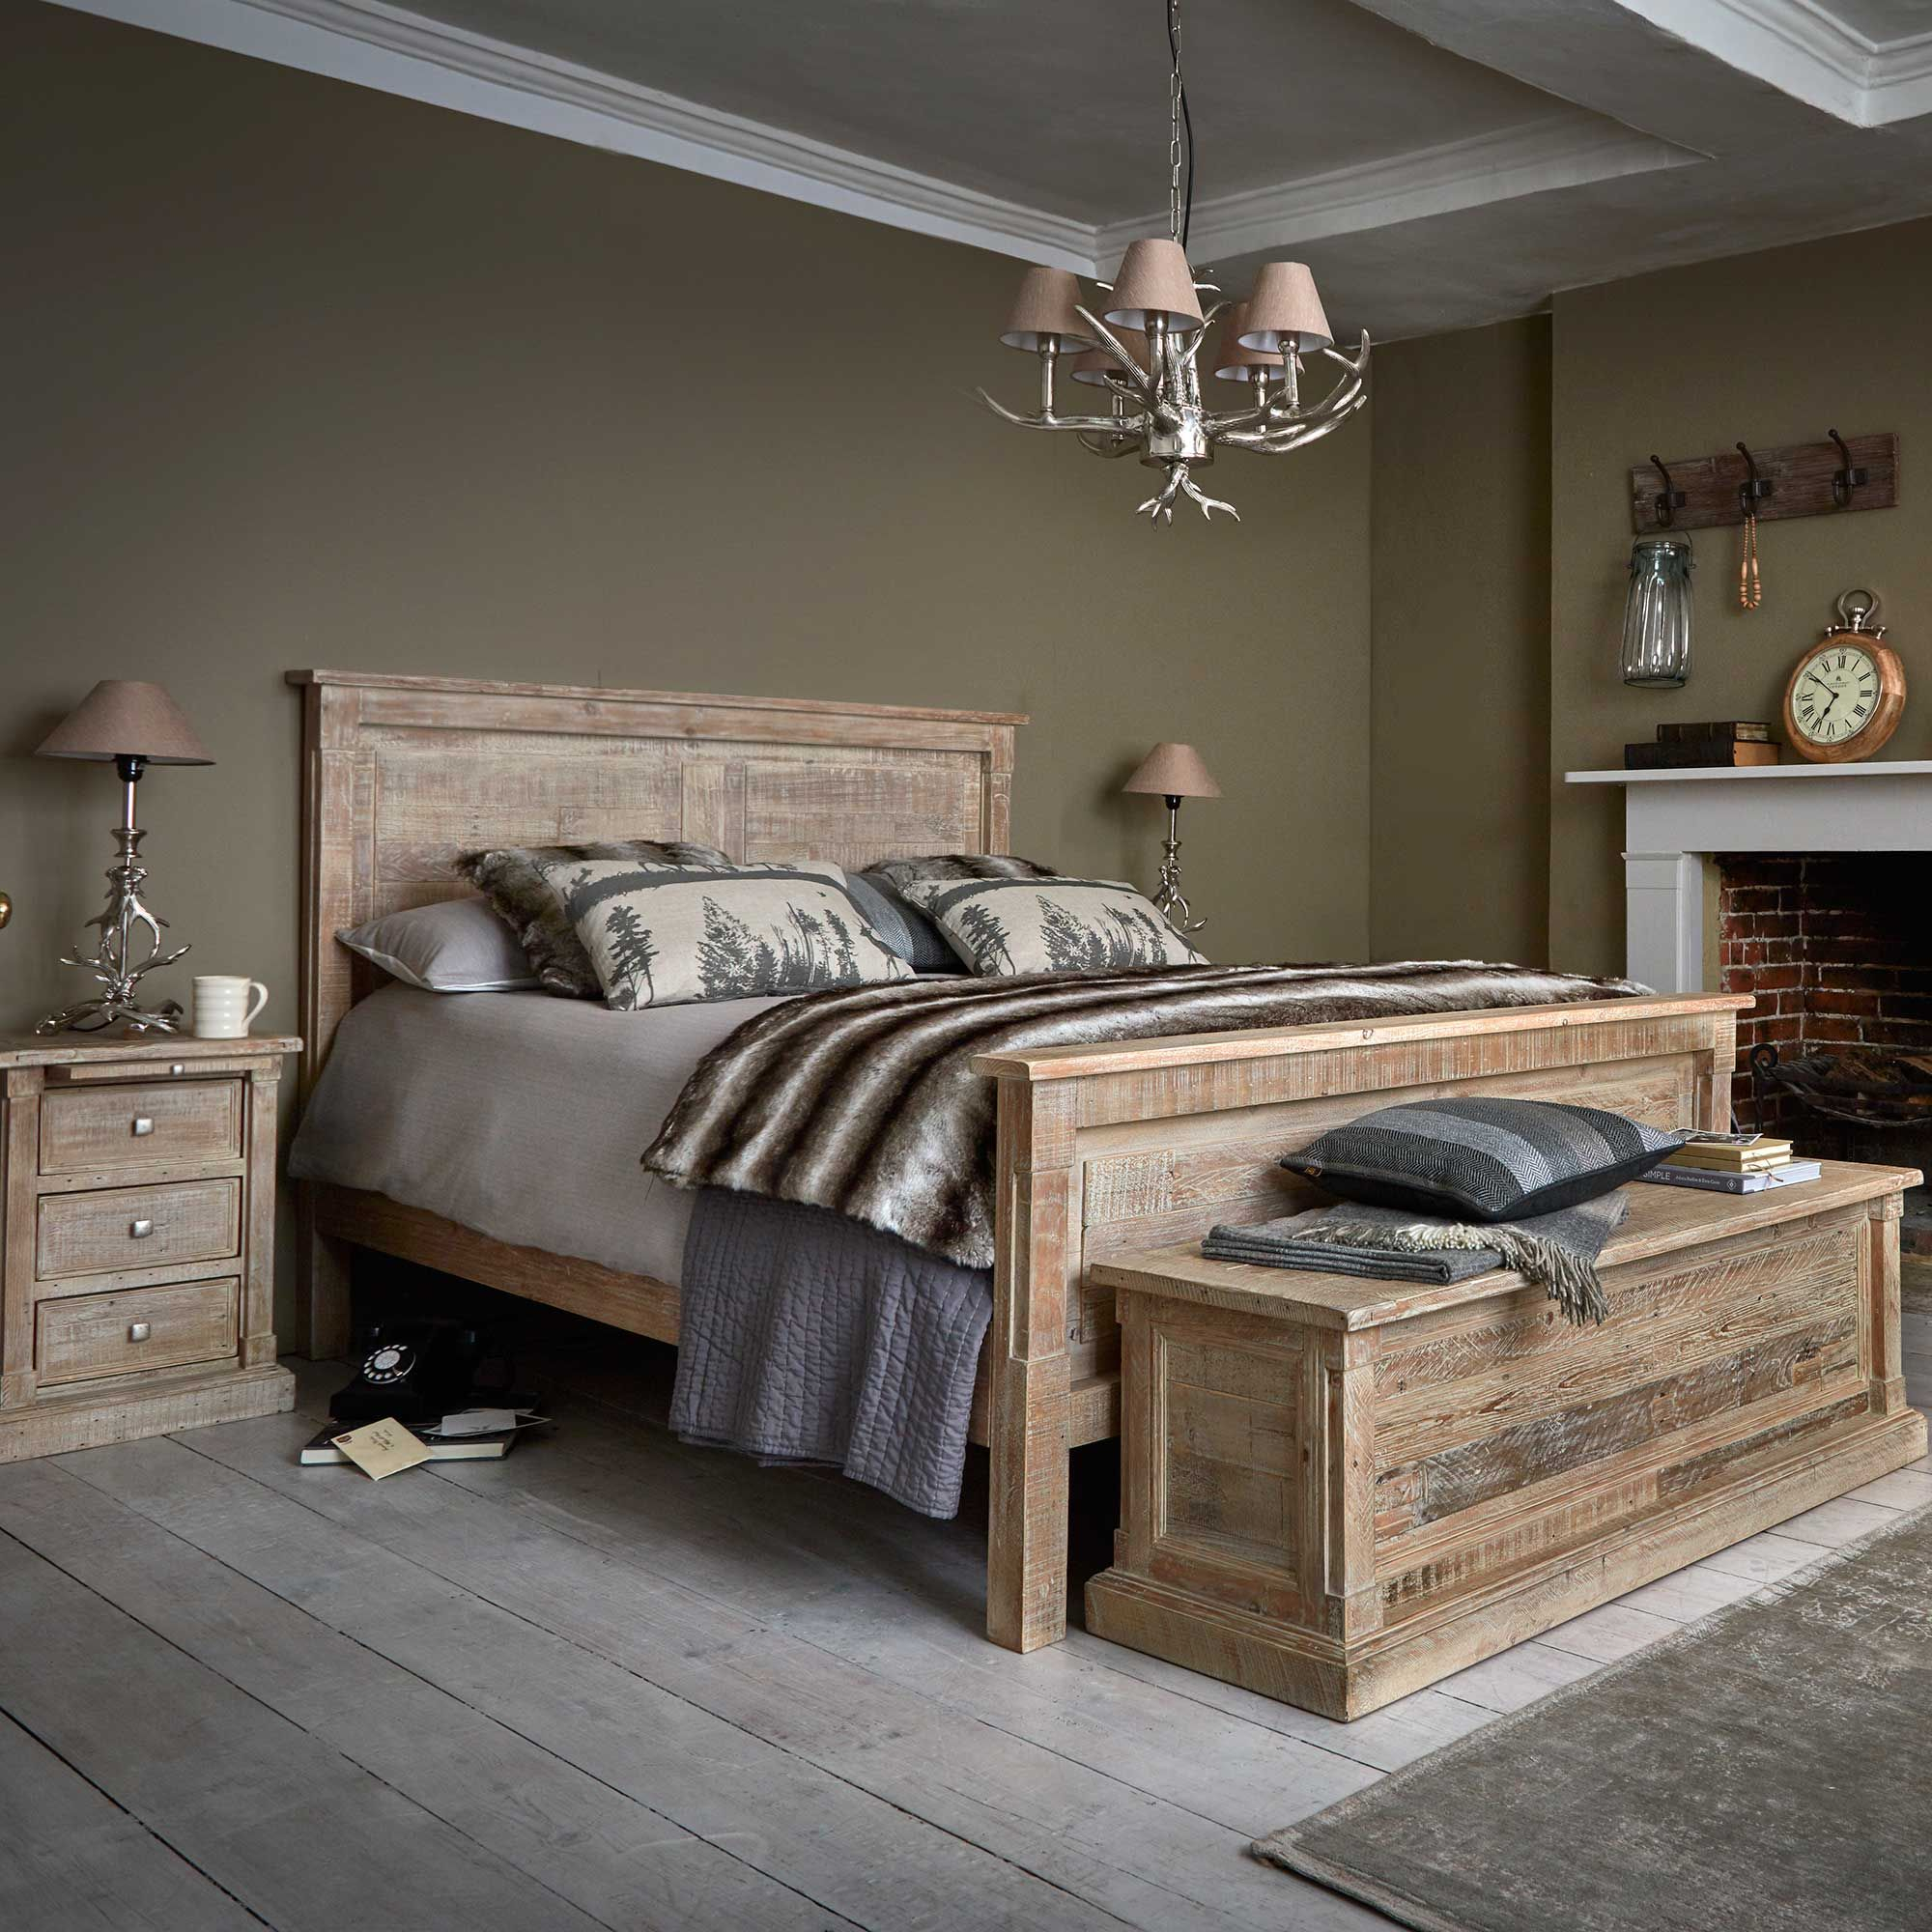 The Austen Bedroom Furniture Range Has A Nautical Rustic Feel With pertaining to dimensions 2000 X 2000